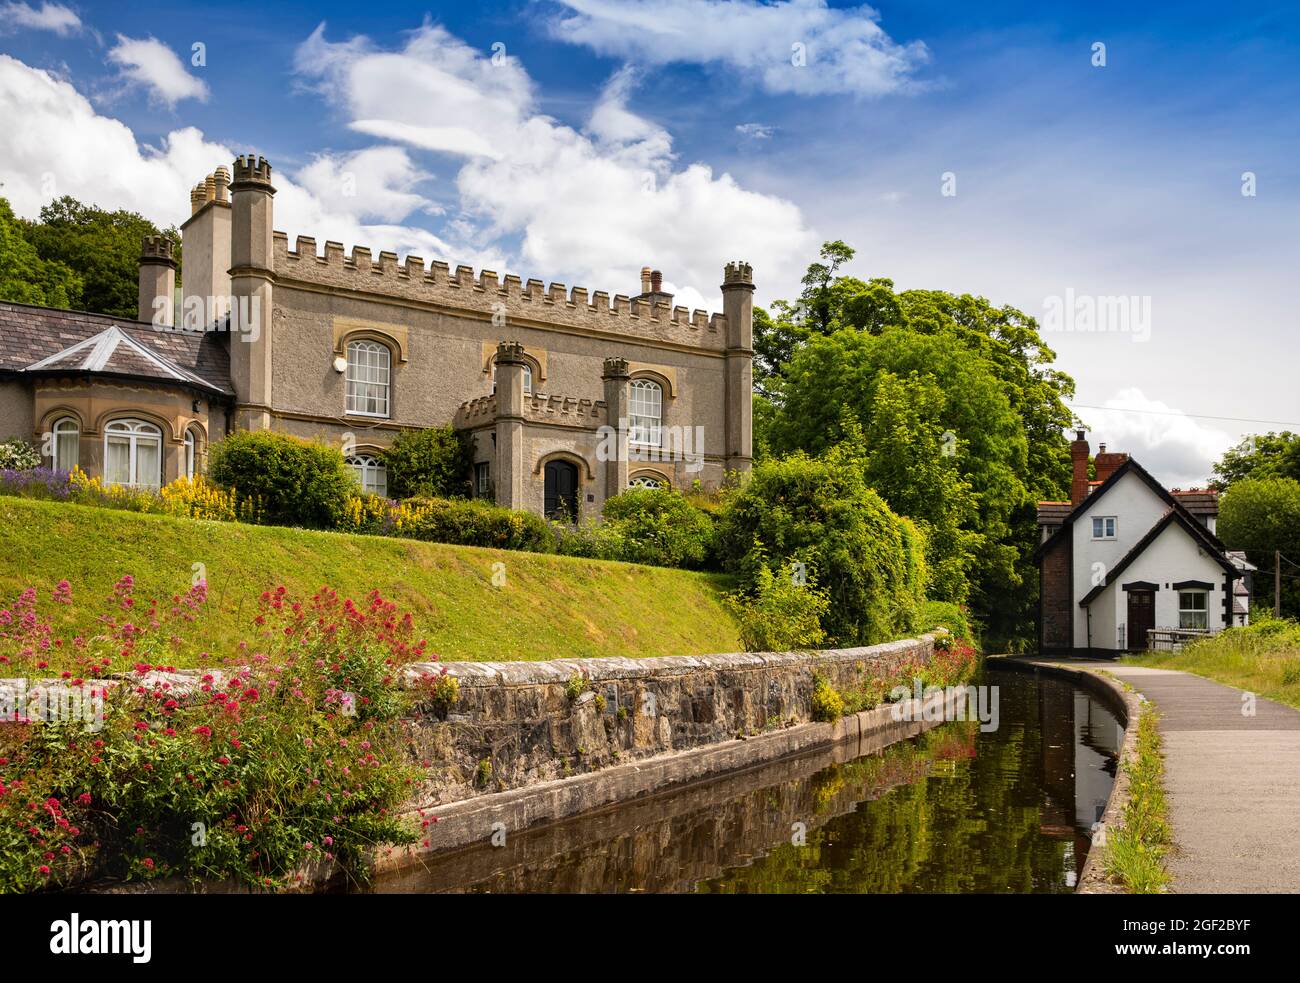 UK Wales, Clwyd, Llangollen, Siamber Wen, 1800s Gothic castellated house beside Llangollen Canal Stock Photo